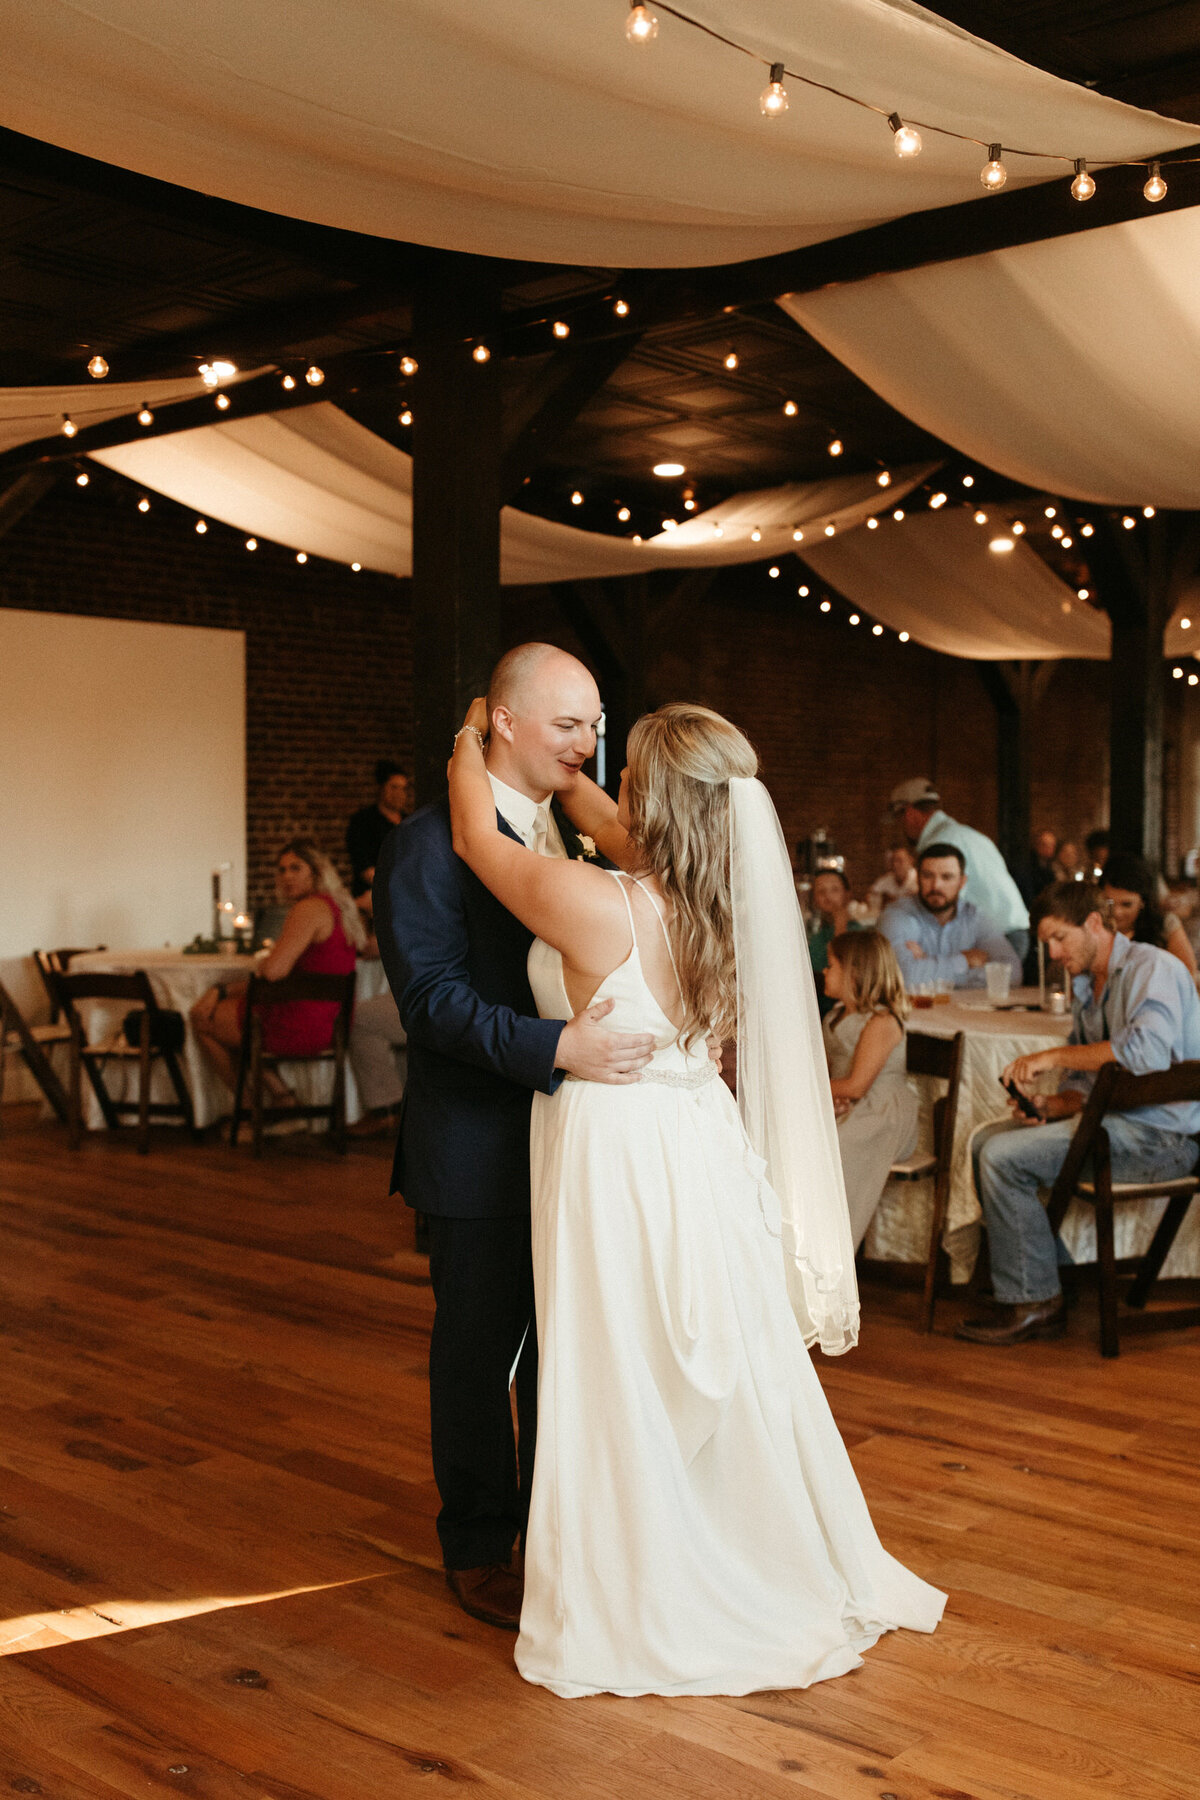 Bride and groom dancing during their first dance in their wedding reception hall with string lights and drapery hanging above them